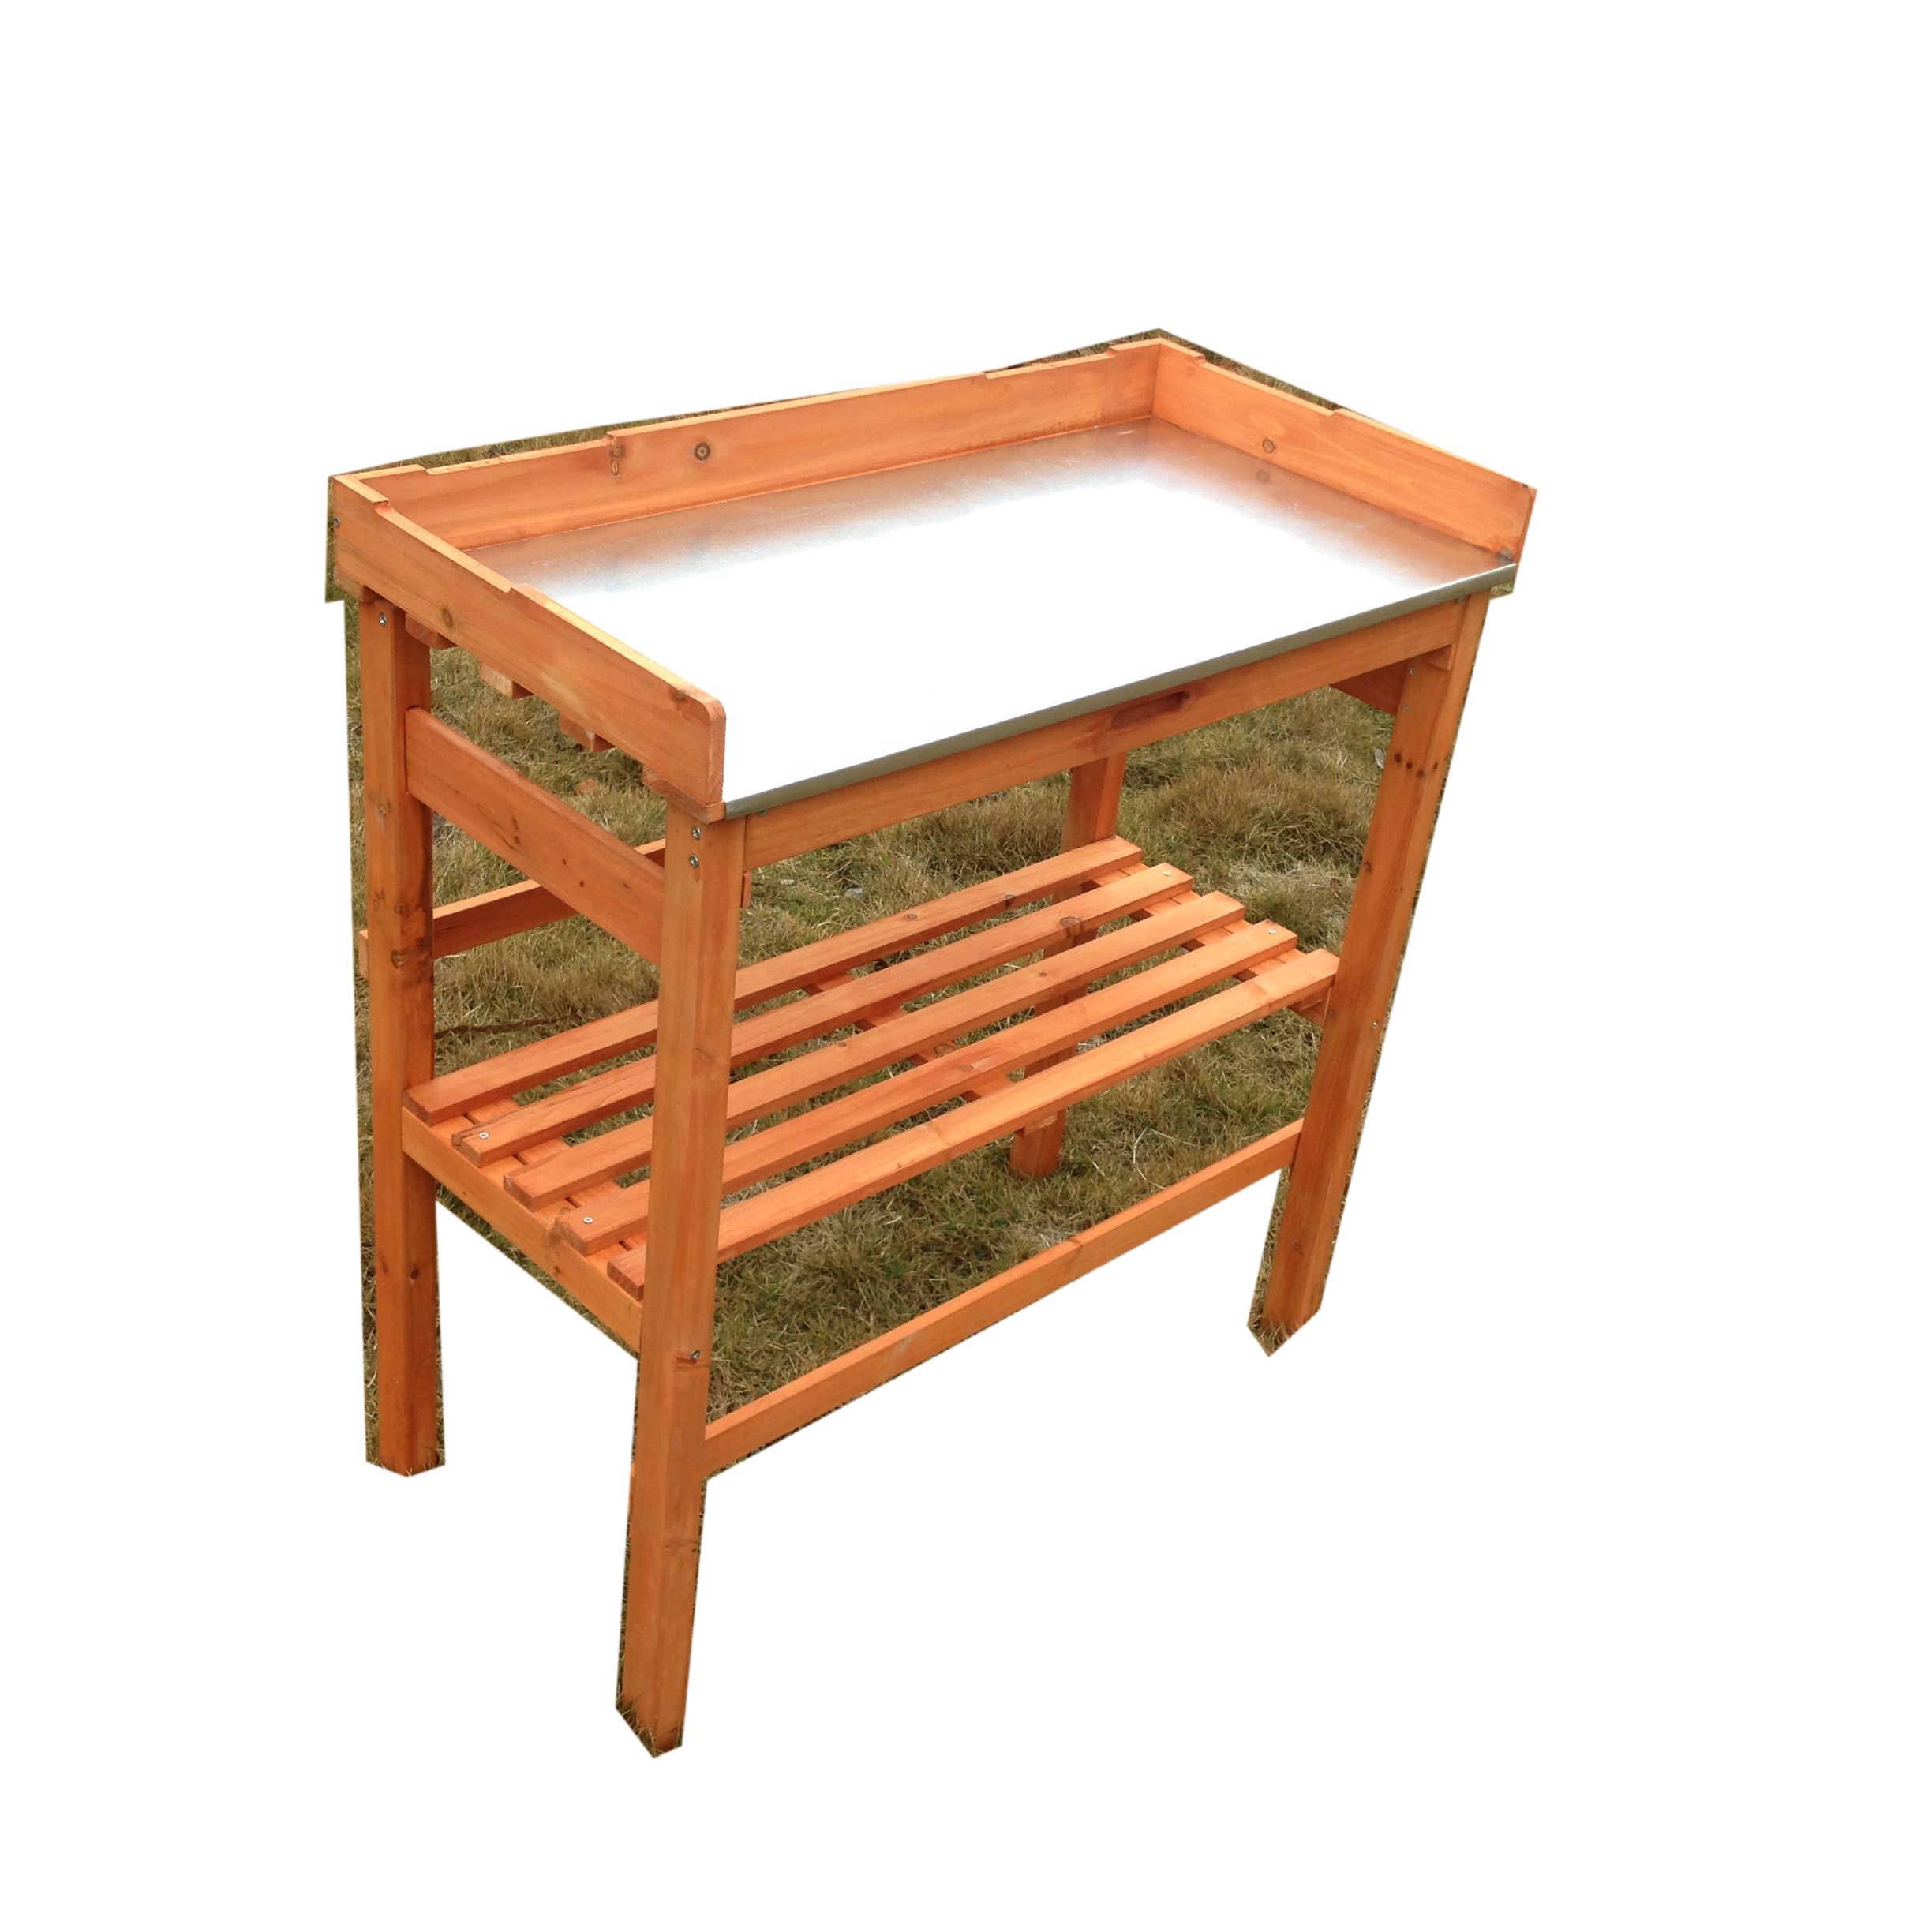 factory garden Corrosion Resistance Vegetable table bench Plant Wooden Flower pot Shelf stand table